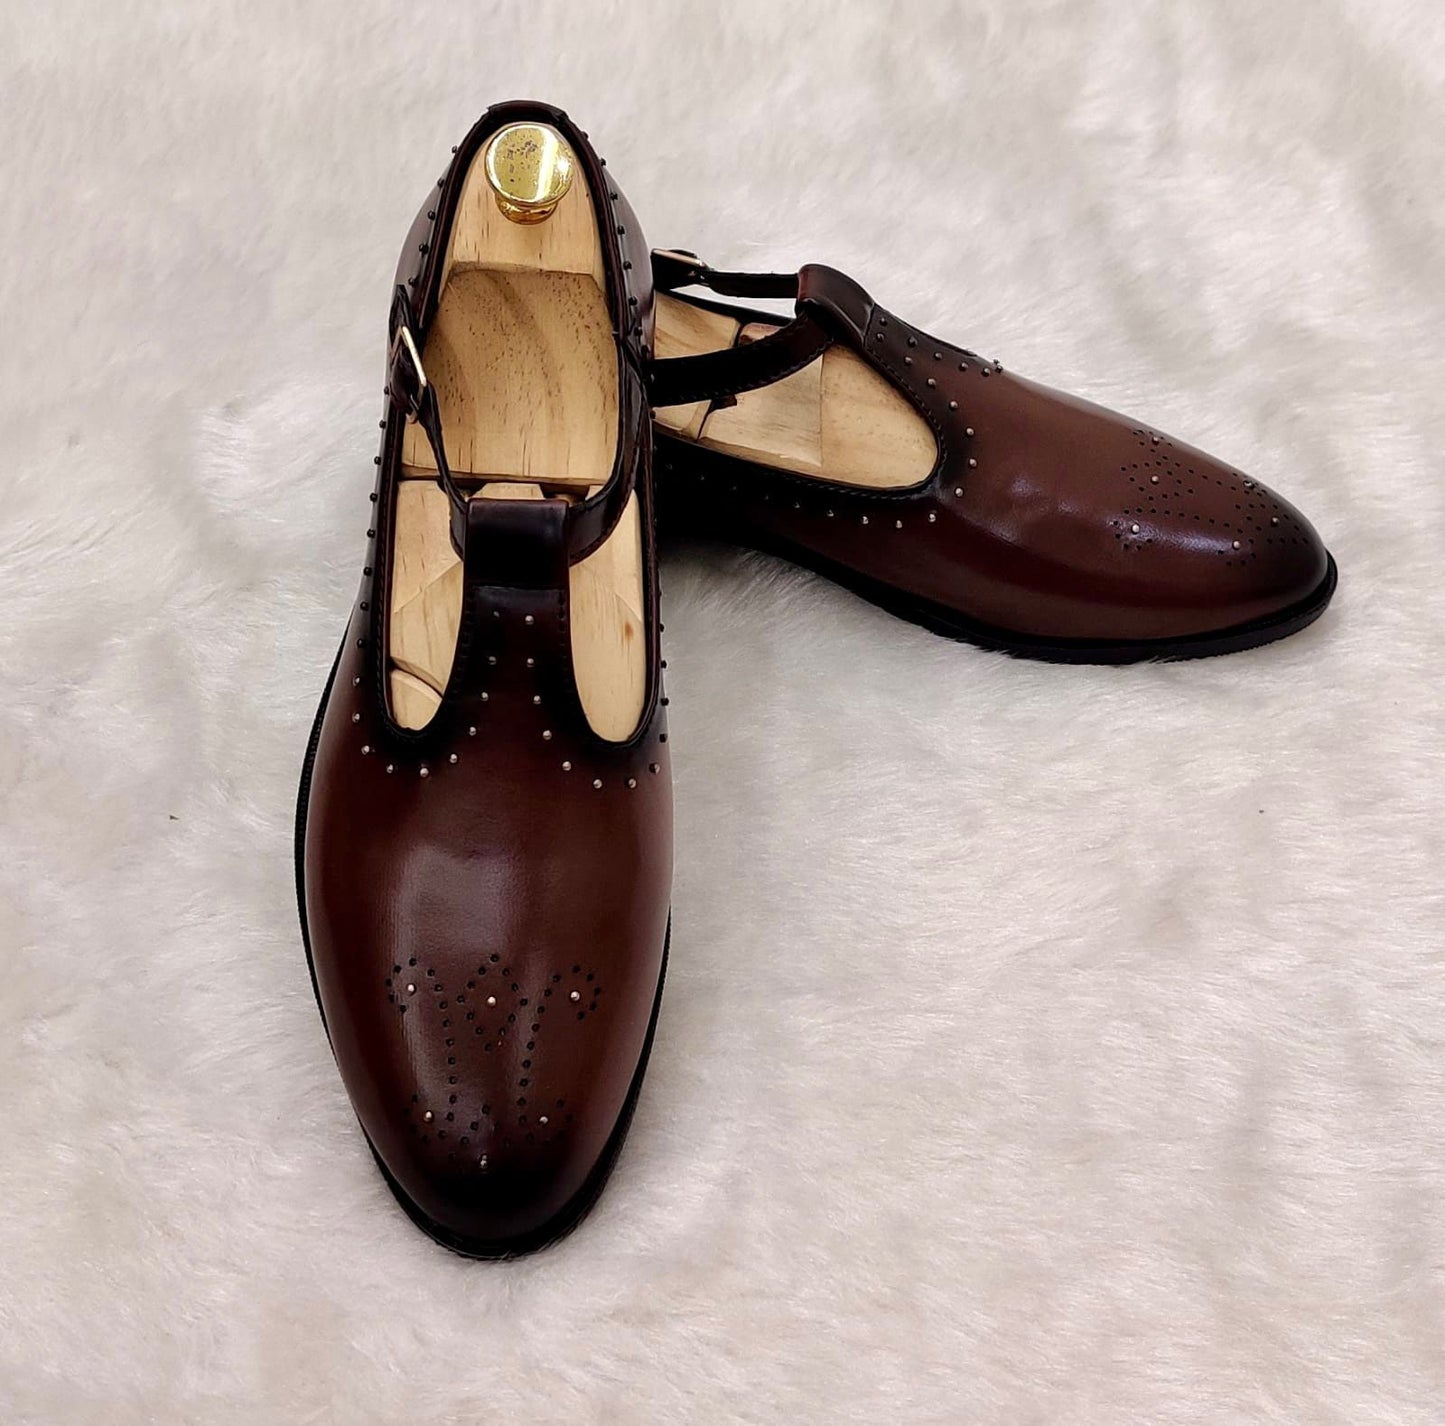 Hand-Painted Brown Peshawari Sandel For Casual And Party Wear-JonasParamount